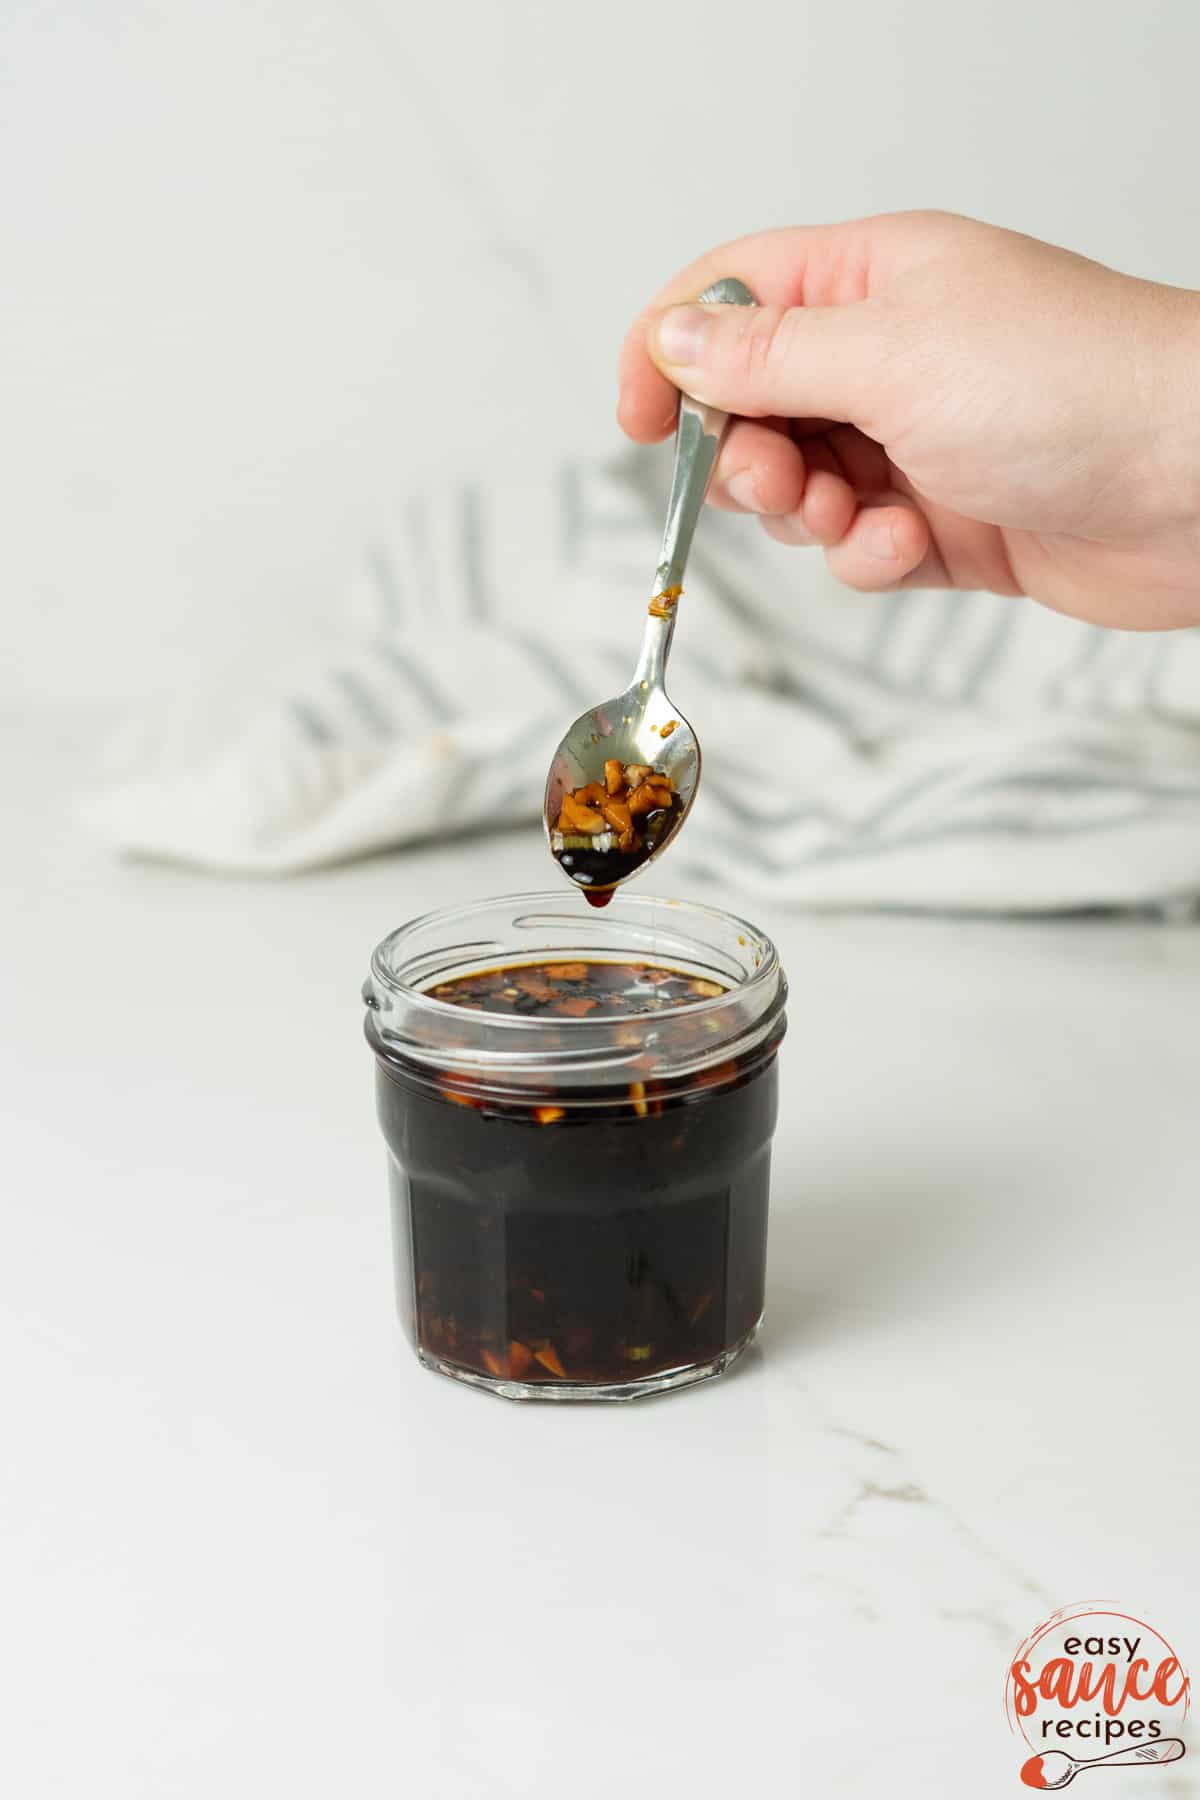 teriyaki sauce in a clear dish with a spoonful overtop